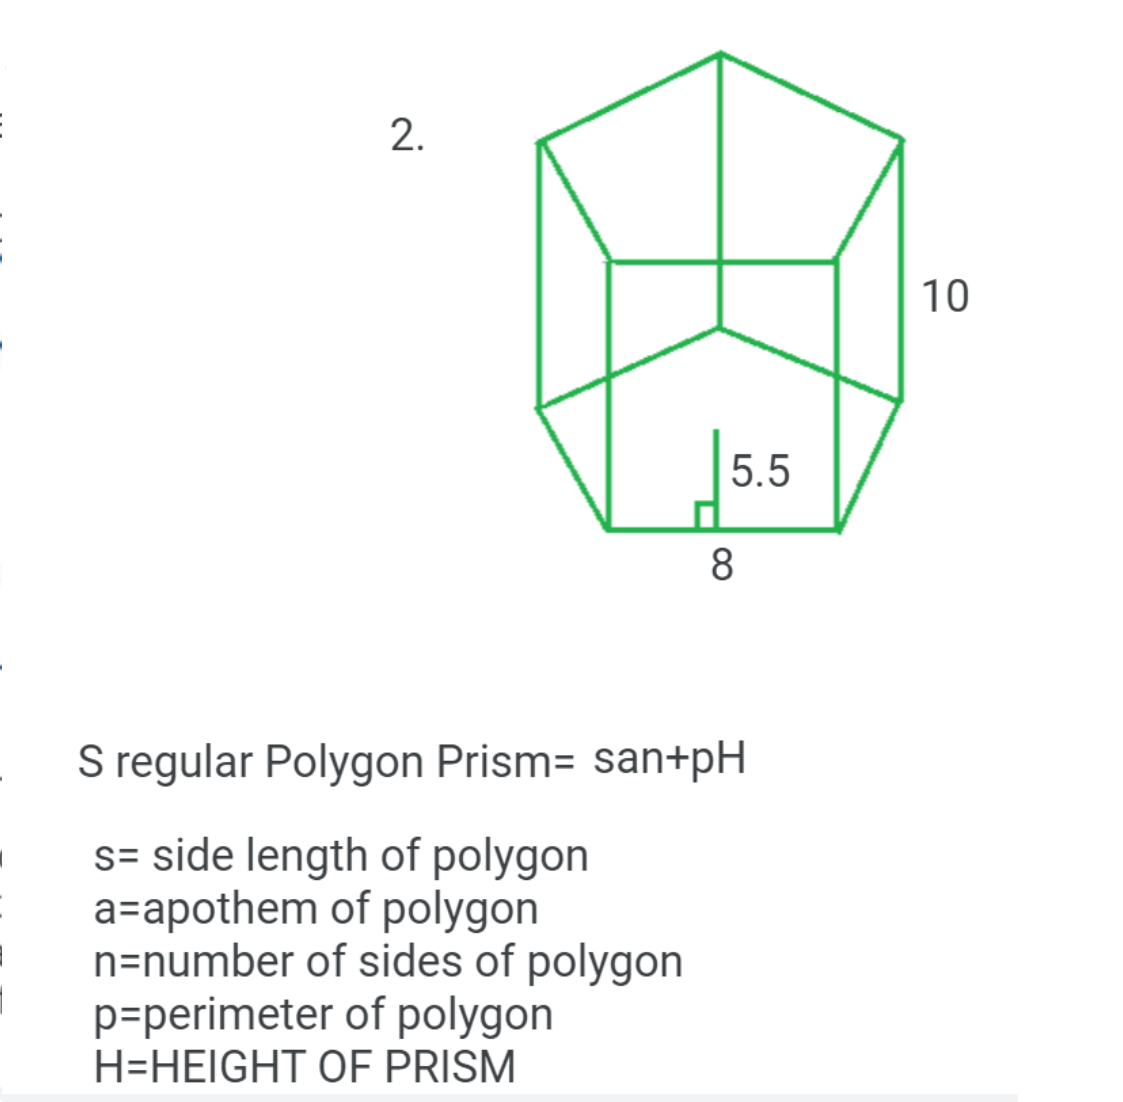 2.
10
5.5
8
S regular Polygon Prism= san+pH
s= side length of polygon
a=apothem of polygon
n=number of sides of polygon
p=perimeter of polygon
H=HEIGHT OF PRISM
